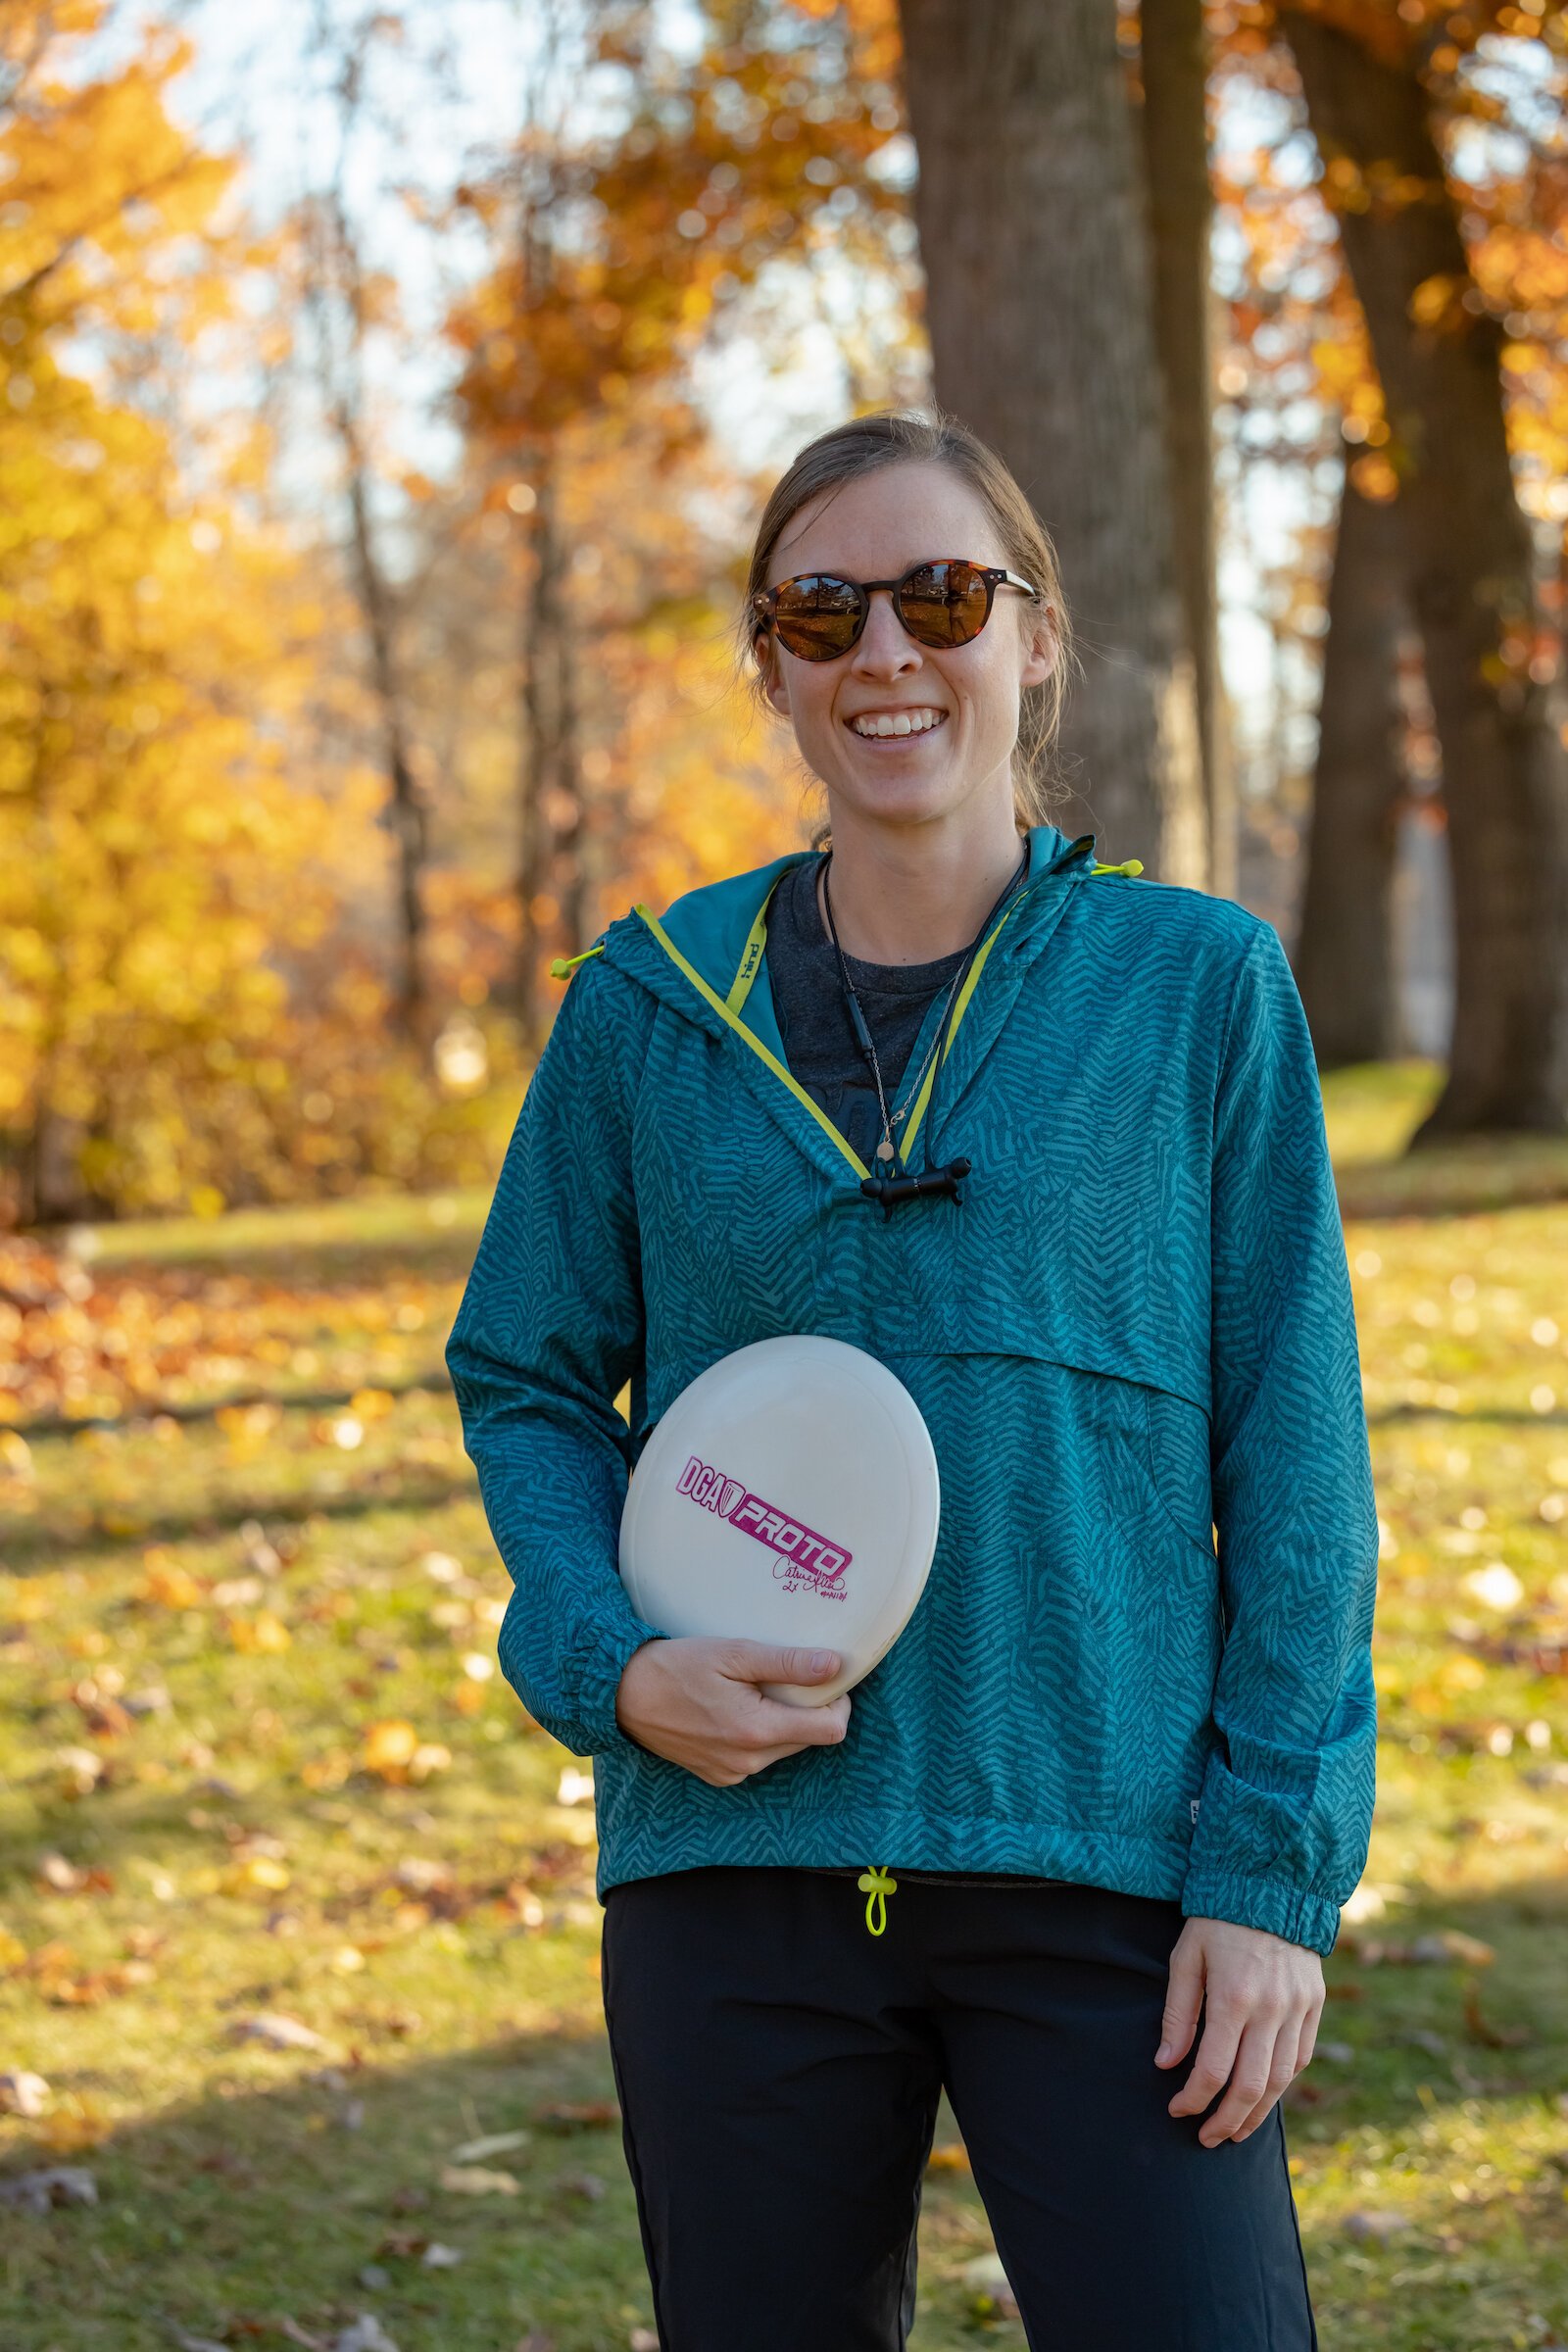 Disc golfer Hannah Lengel is the highest-rated amateur woman in Indiana and the second-highest-rated woman overall in Indiana.